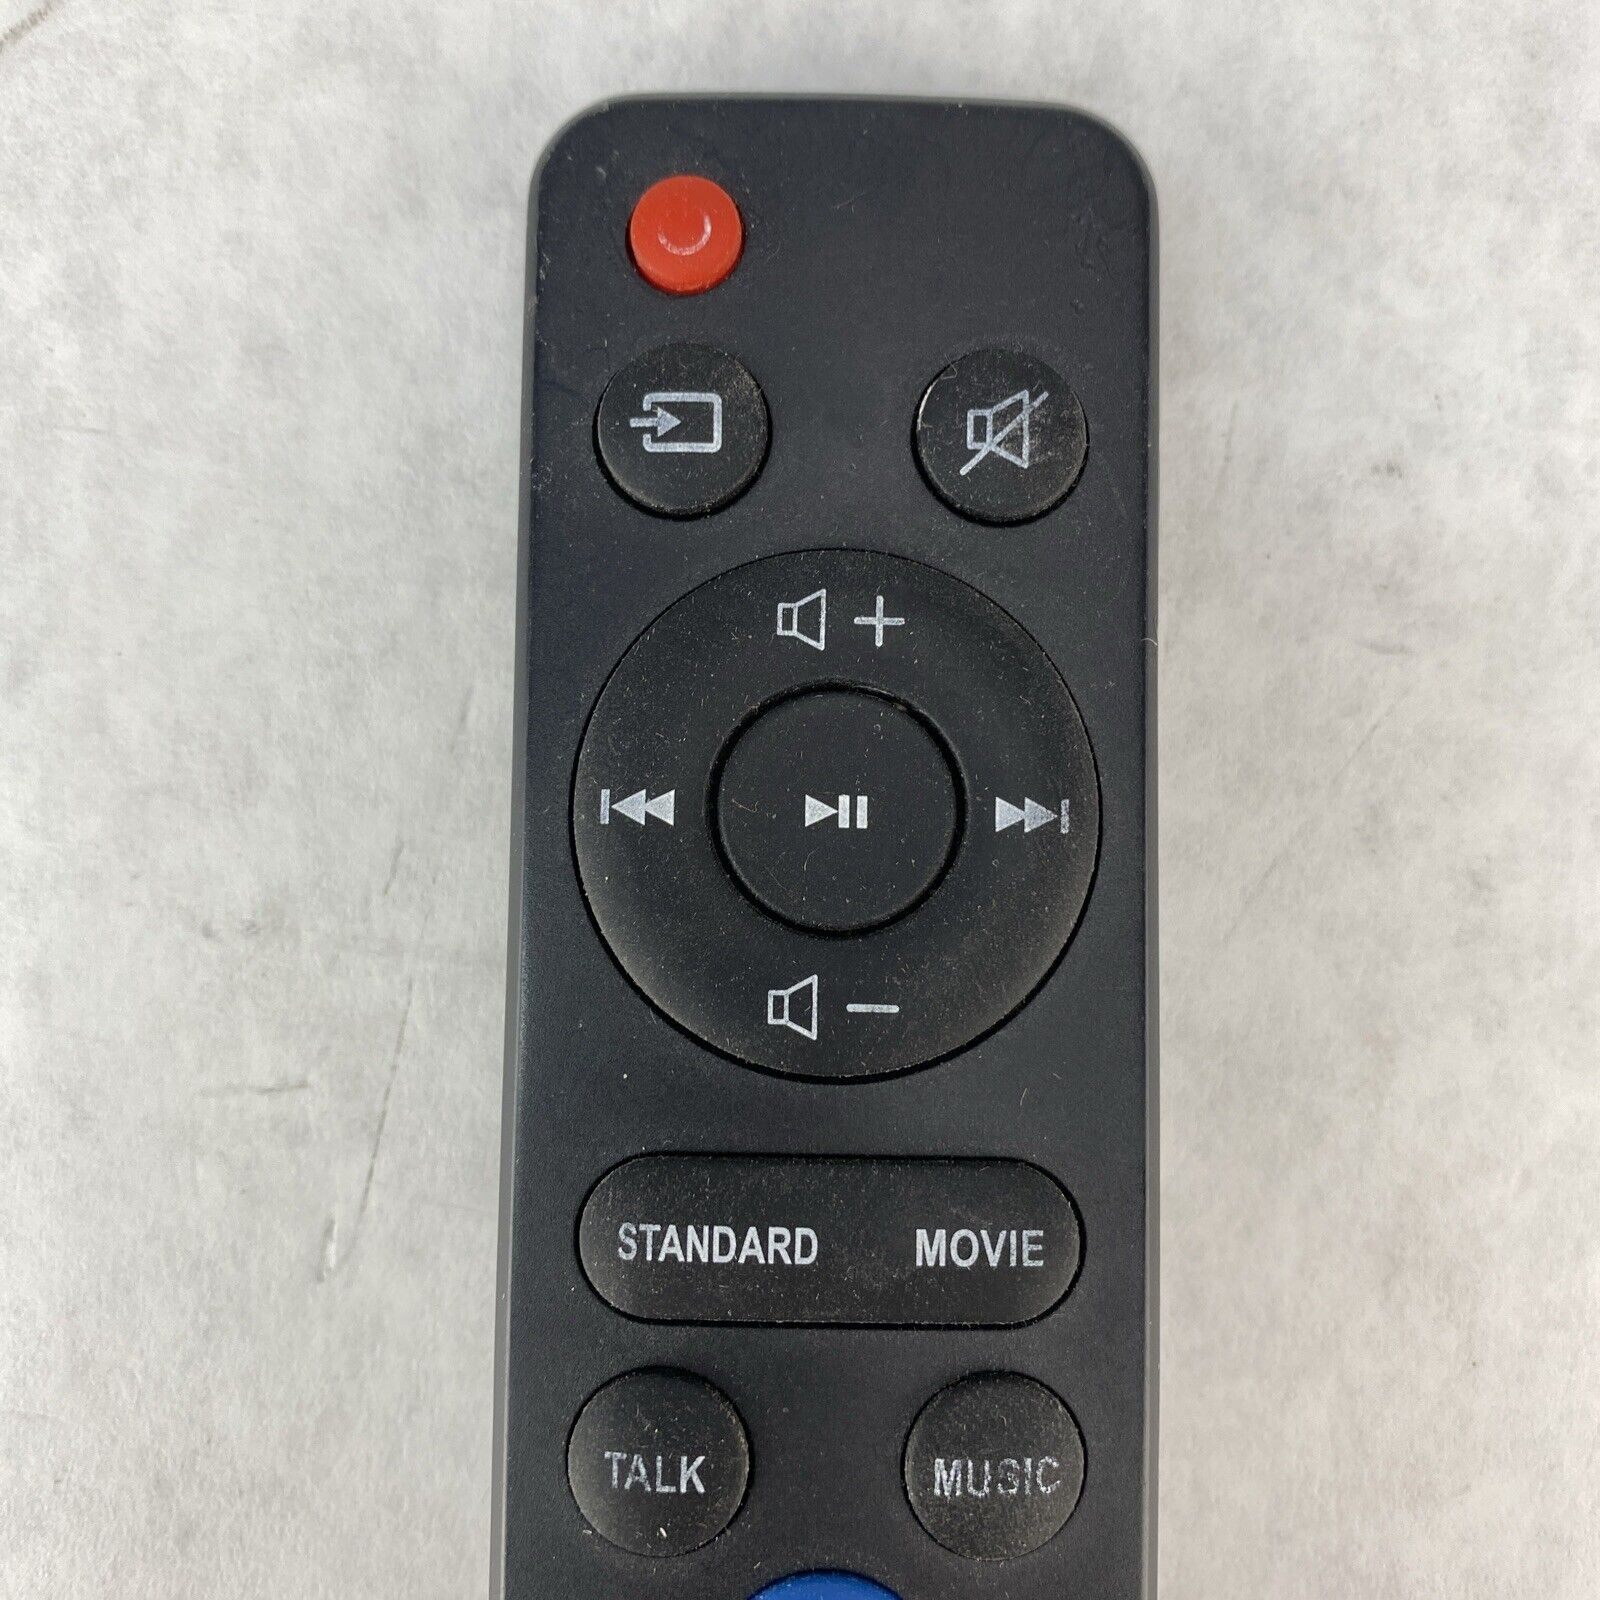 OEM Remote Control for Auking HDMI Projector Bluetooth Standard Movie Talk Music